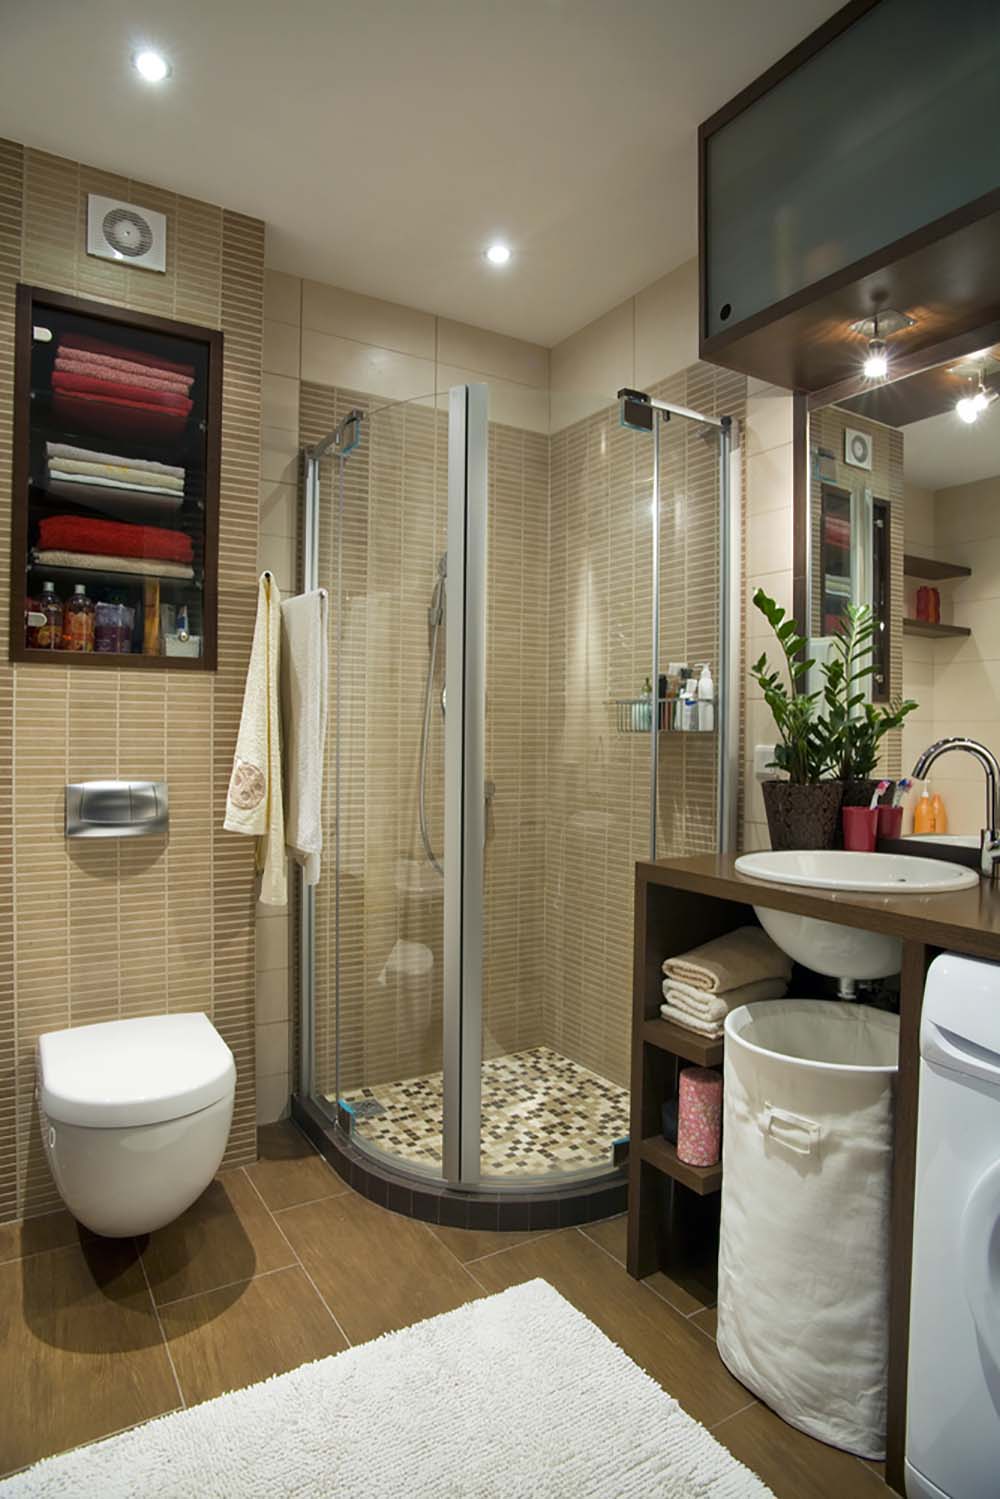 51 Beautiful and Functional Small Bathrooms